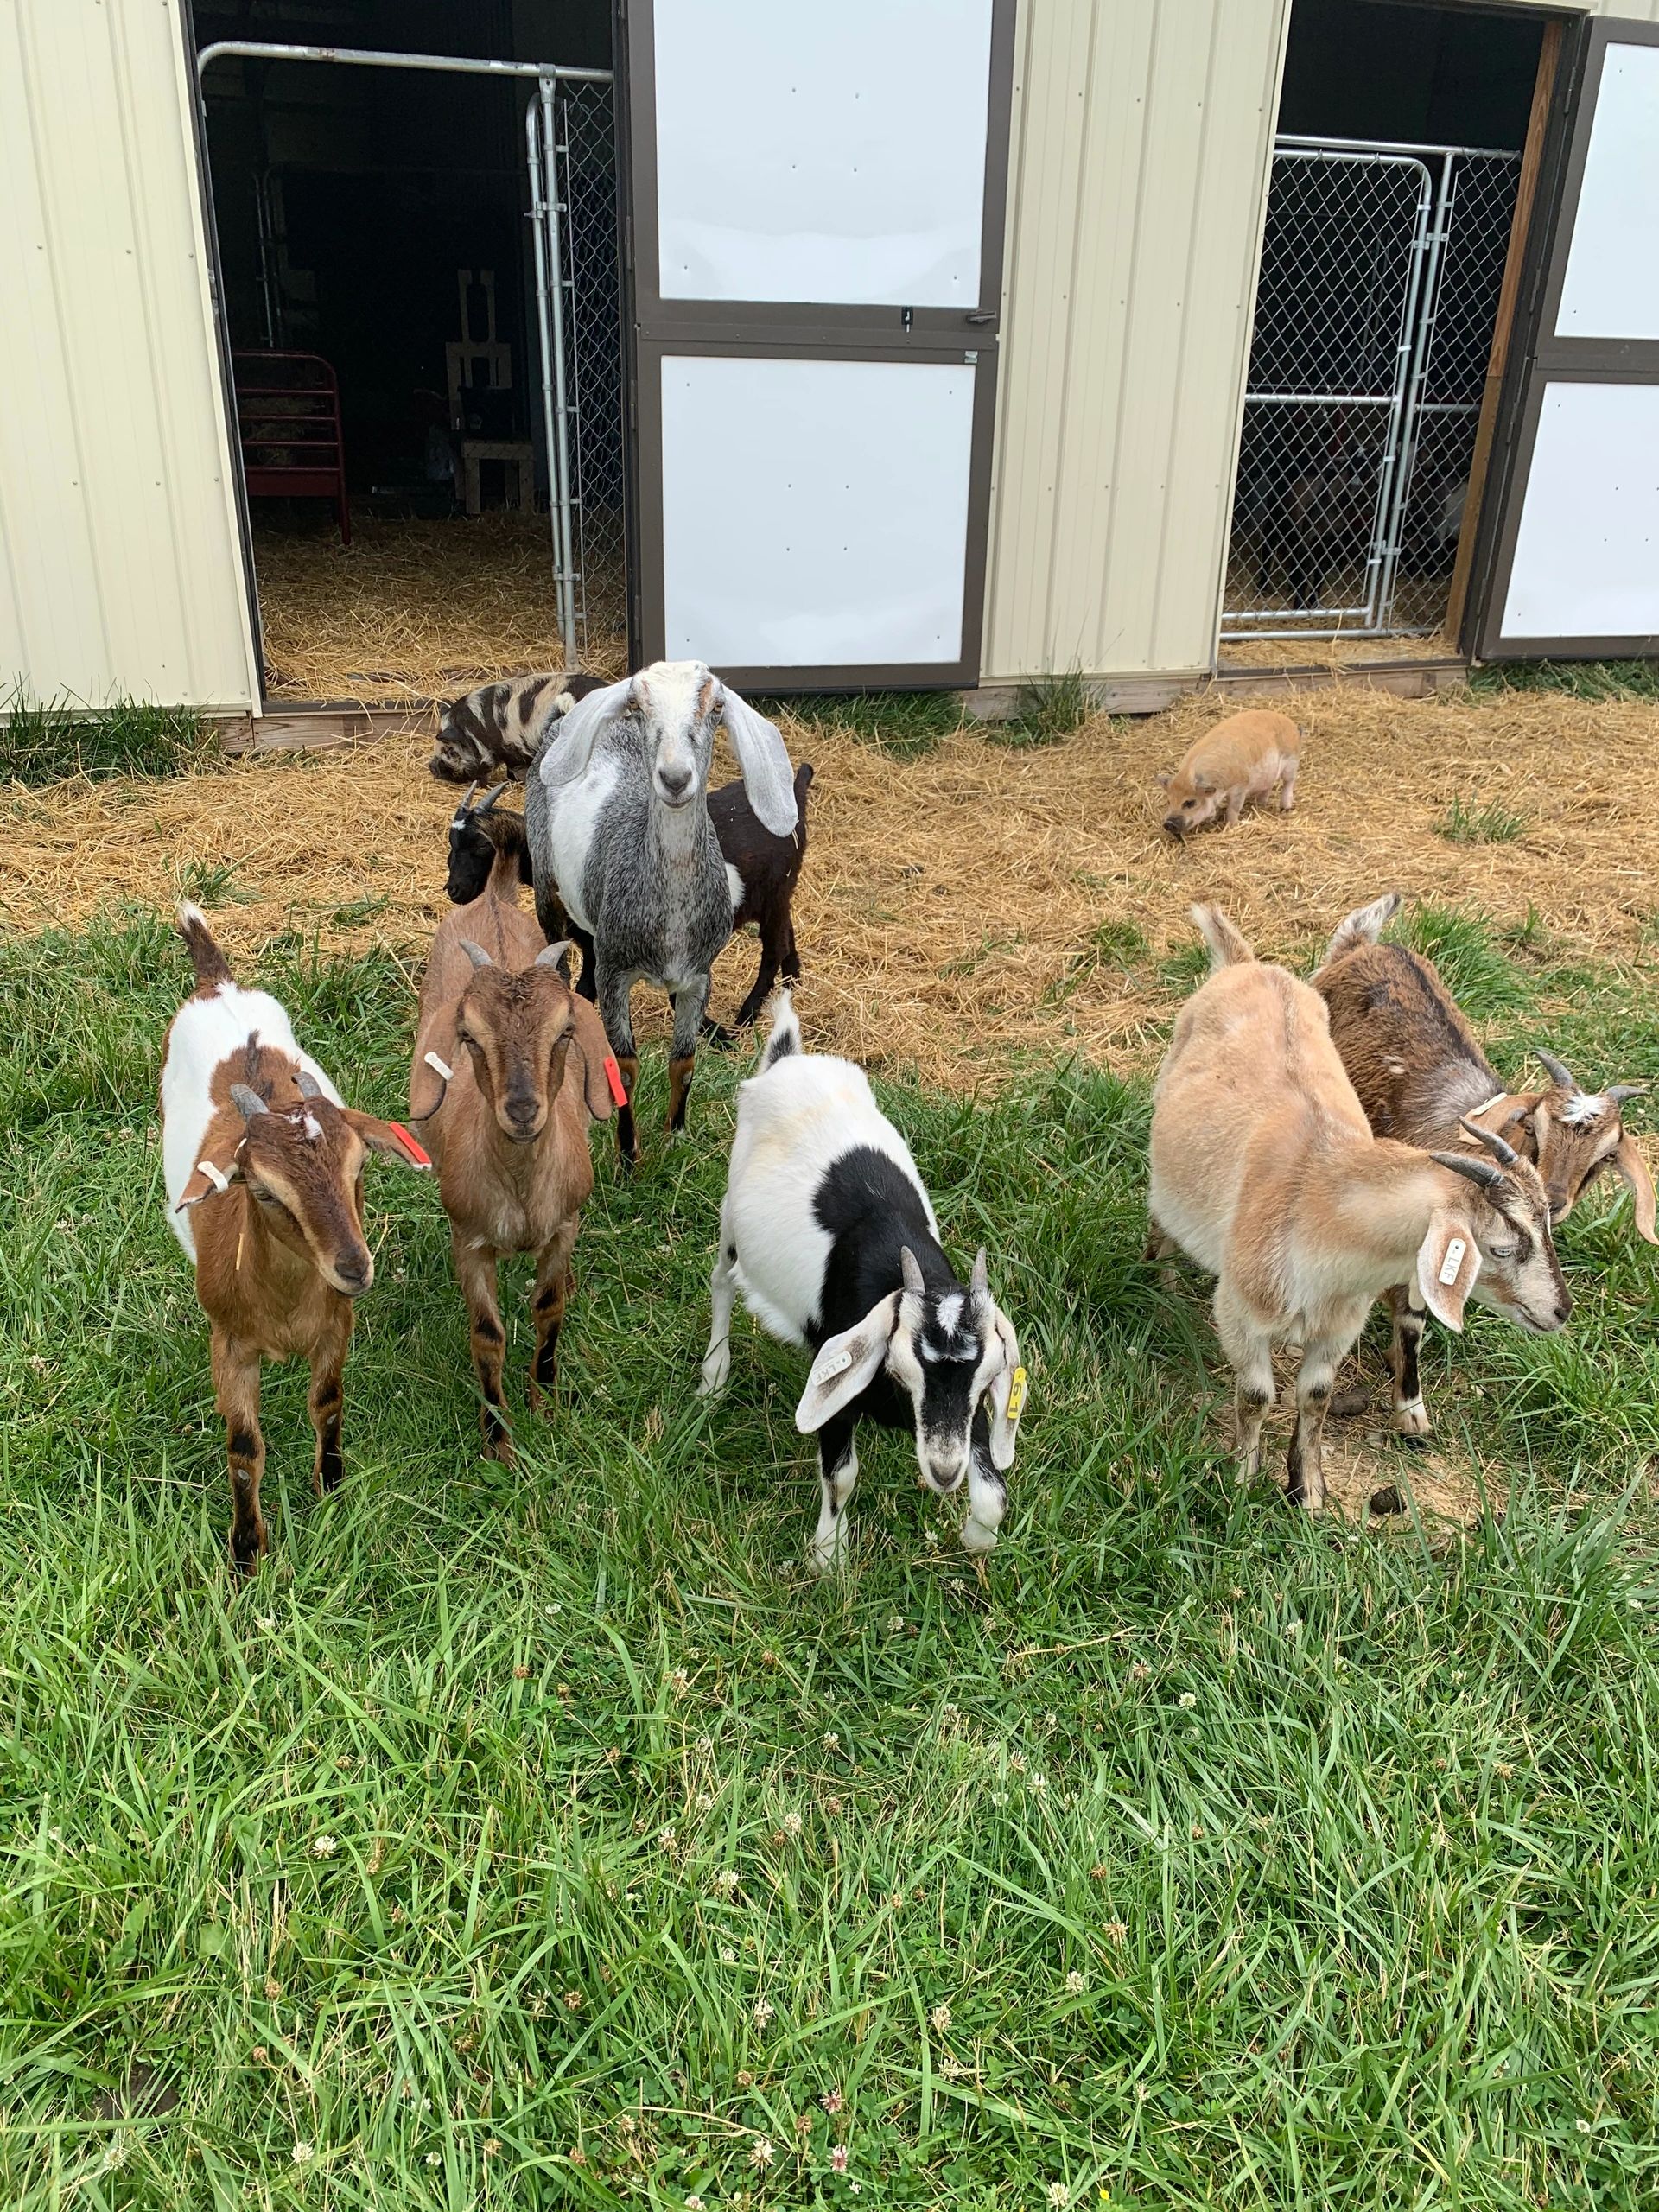 Herd of goats standing in grass, with colorful pigs in background.